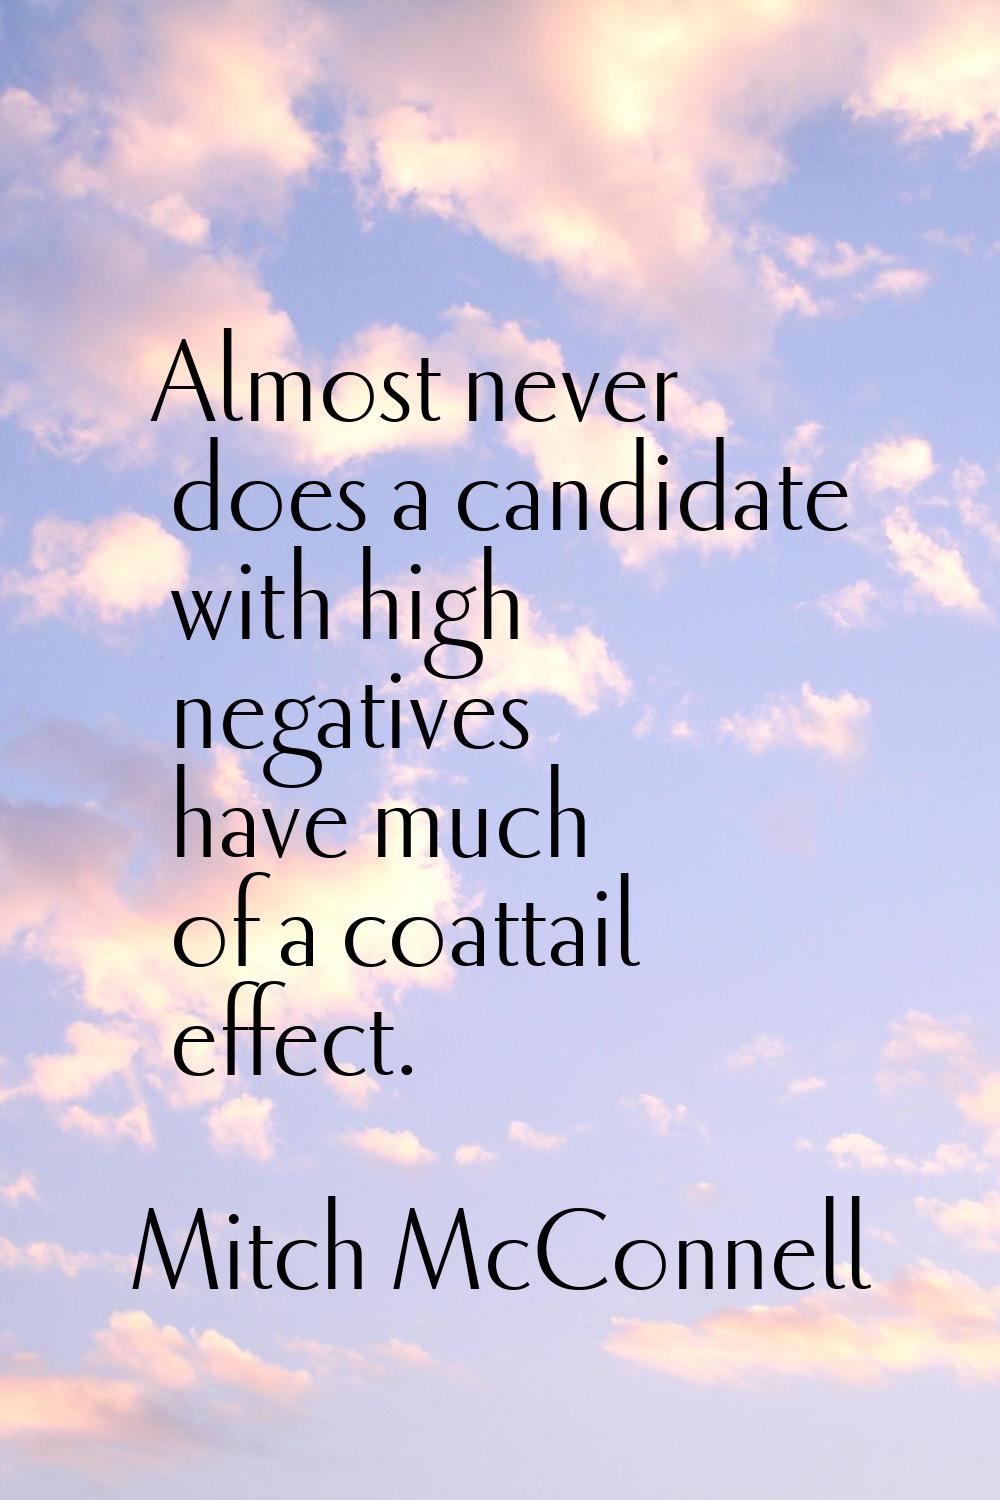 Almost never does a candidate with high negatives have much of a coattail effect.